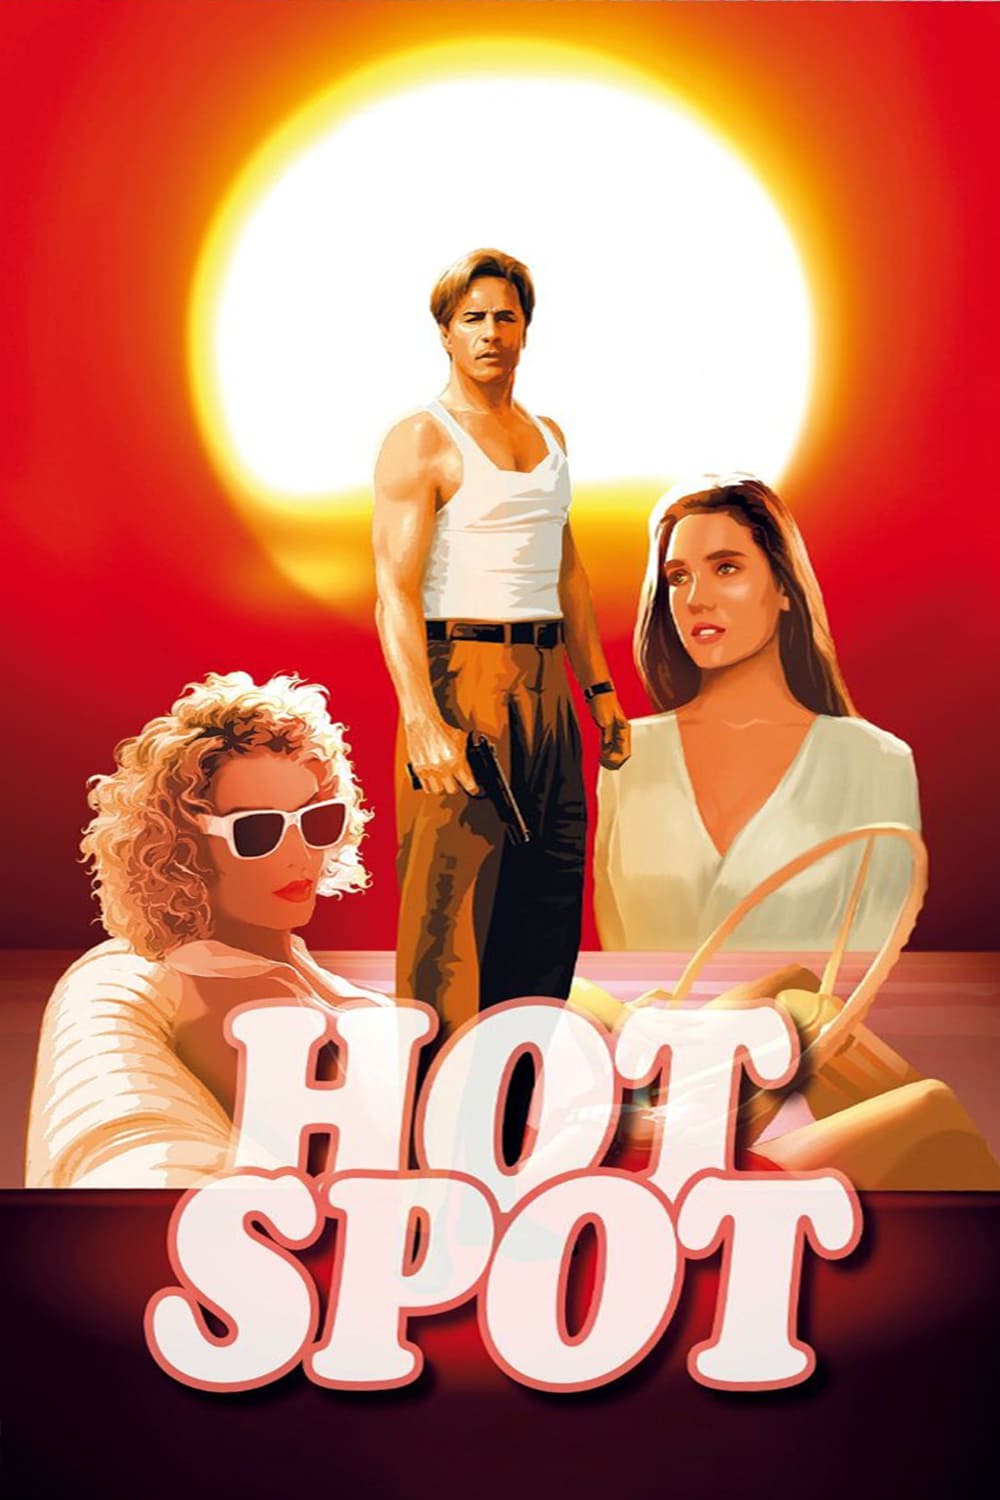 55 HQ Photos Hot Spot Movie Don Johnson / Entertainment Memorabilia Movie Memorabilia The Hot Spot Movie Poster 27x40 Don Johnson Virginia Madsen Jennifer Connelly Posters Zsco Iq